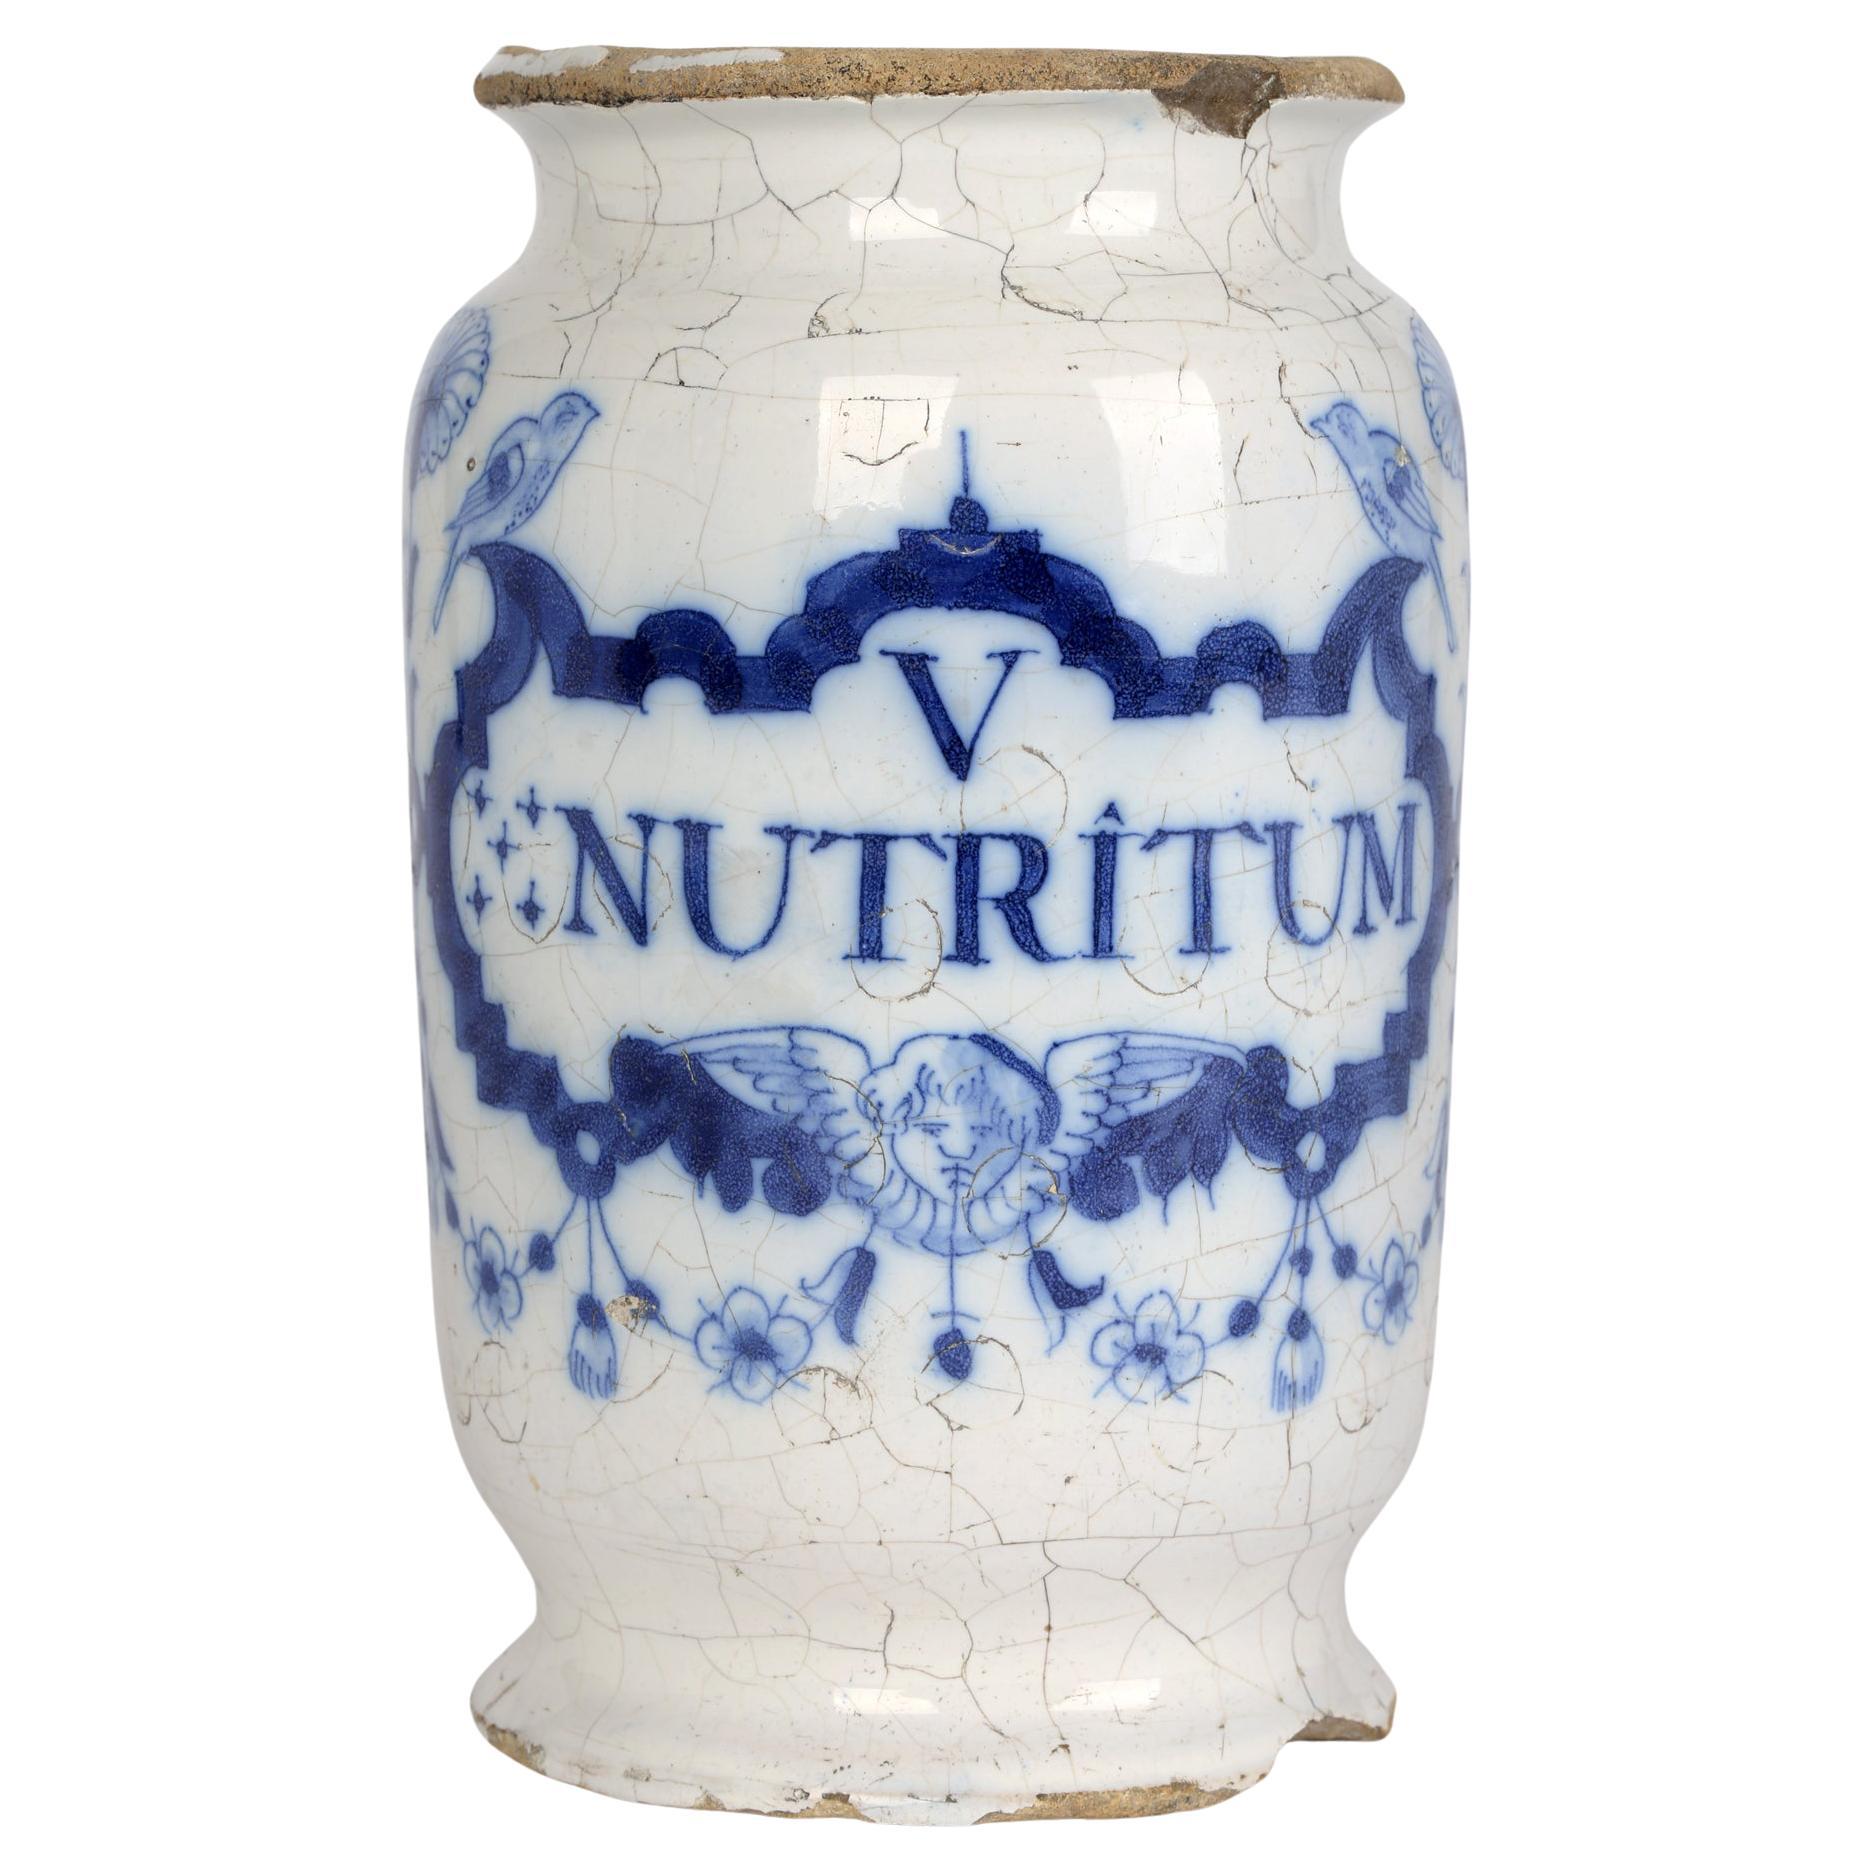 Delft Pottery Early 18th Century Apothecary Jar Marked Nutritum